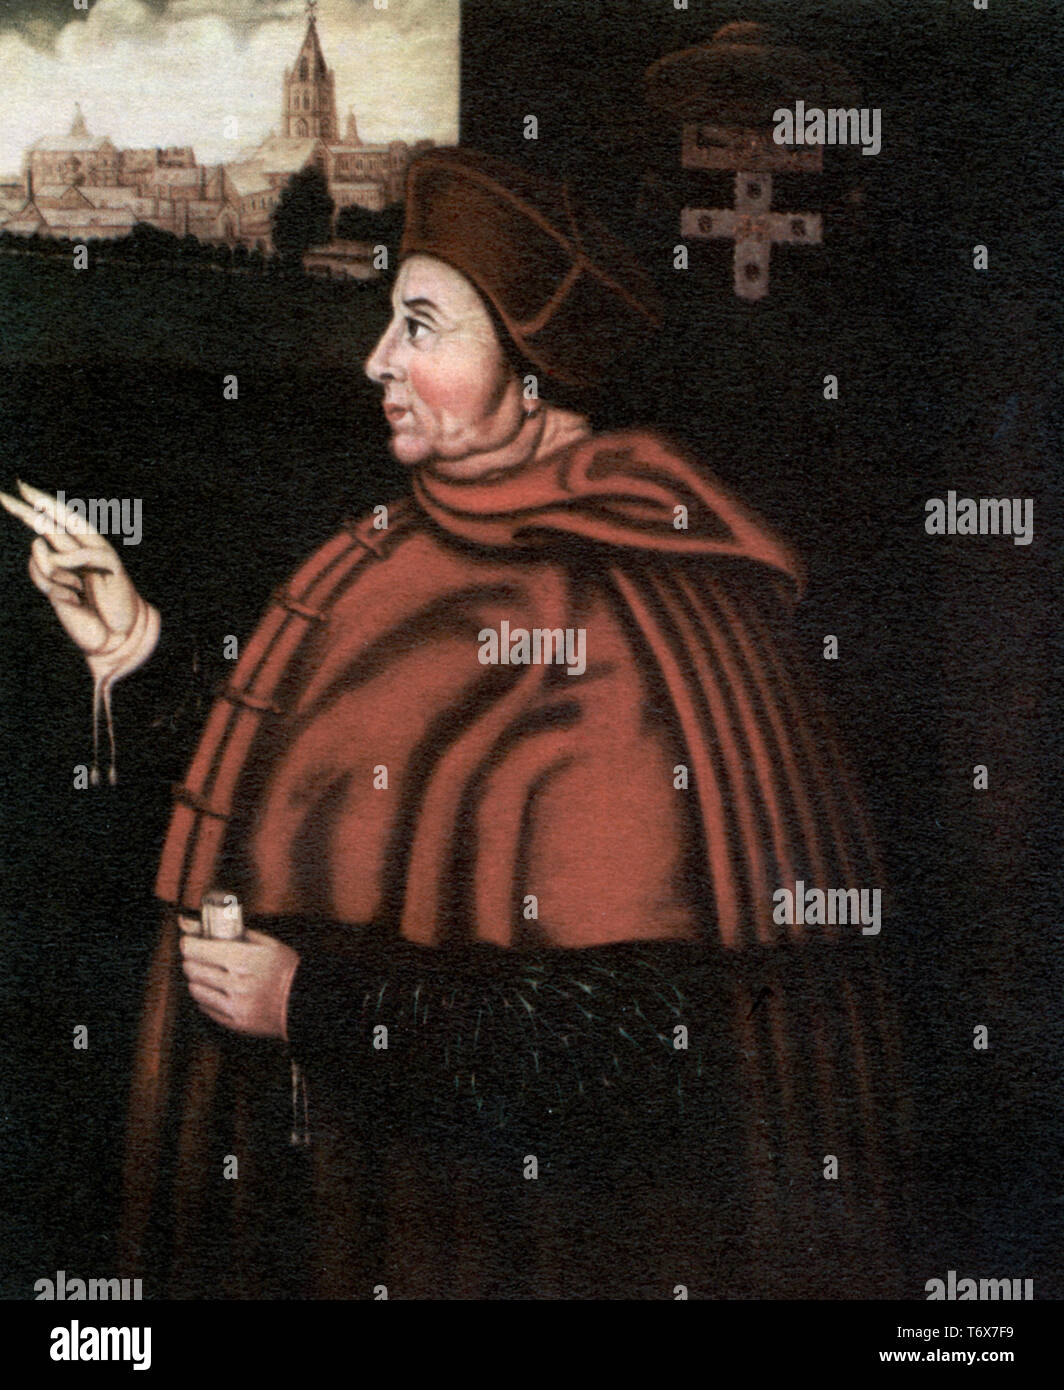 Cardinal Thomas Wolsey (c1473-1530), 16th century. After Sampson Strong (c1550-1611). Archbishop of York and Lord Chancellor of England. Cardinal Thomas Wolsey English bishop, statesman and a cardinal of the Catholic Church. Stock Photo